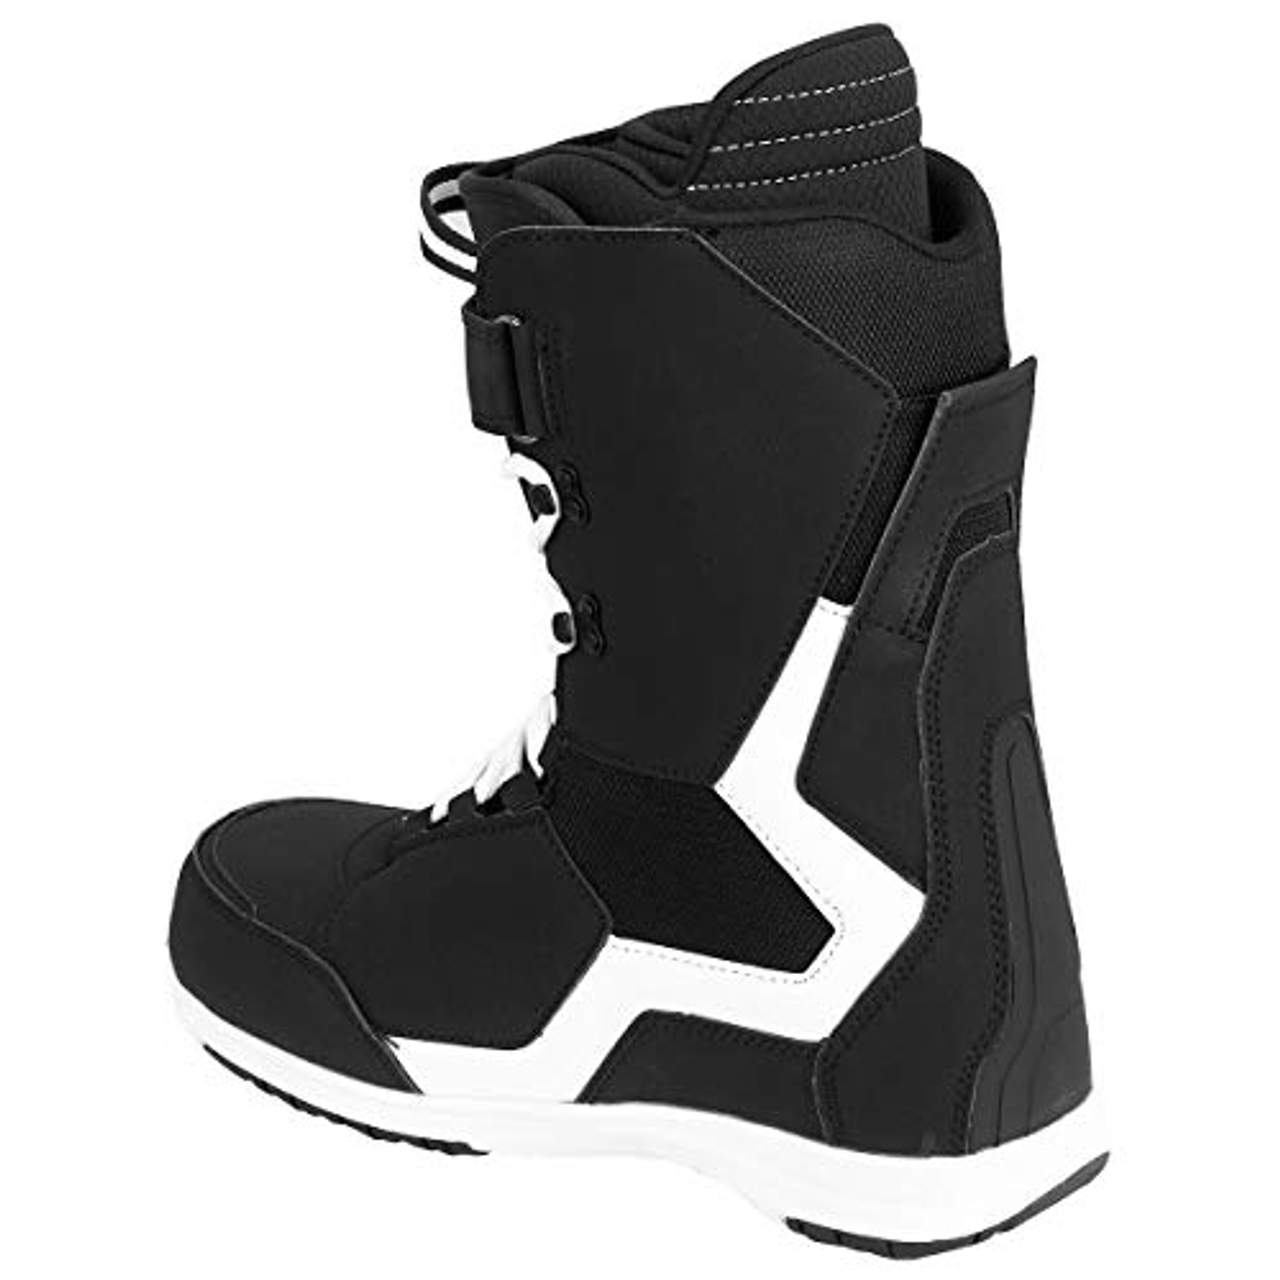 Airtracks Snowboard Boots Strong SW